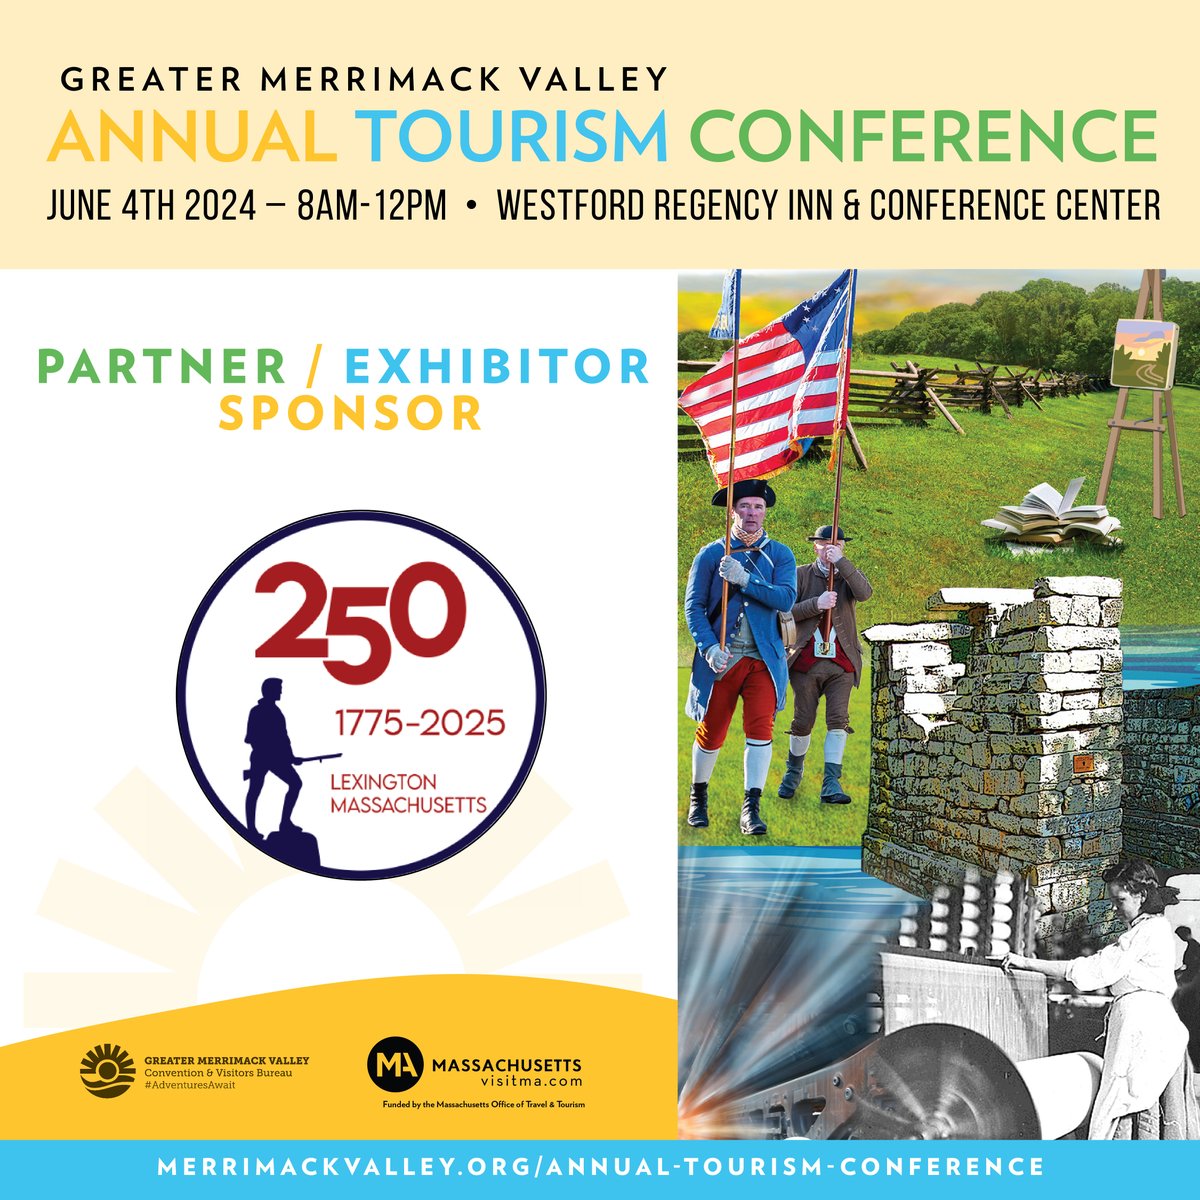 🇺🇸 A huge THANK YOU to @Lexington250 for sponsoring the 2024 Annual Tourism Conference! 🌟 Join us on Tuesday, June 4th from 8AM – 12PM at the Westford Regency Inn & Conference Center. Let's explore the future of tourism together! #Lex250 #MerrimackValley #History #Tourism